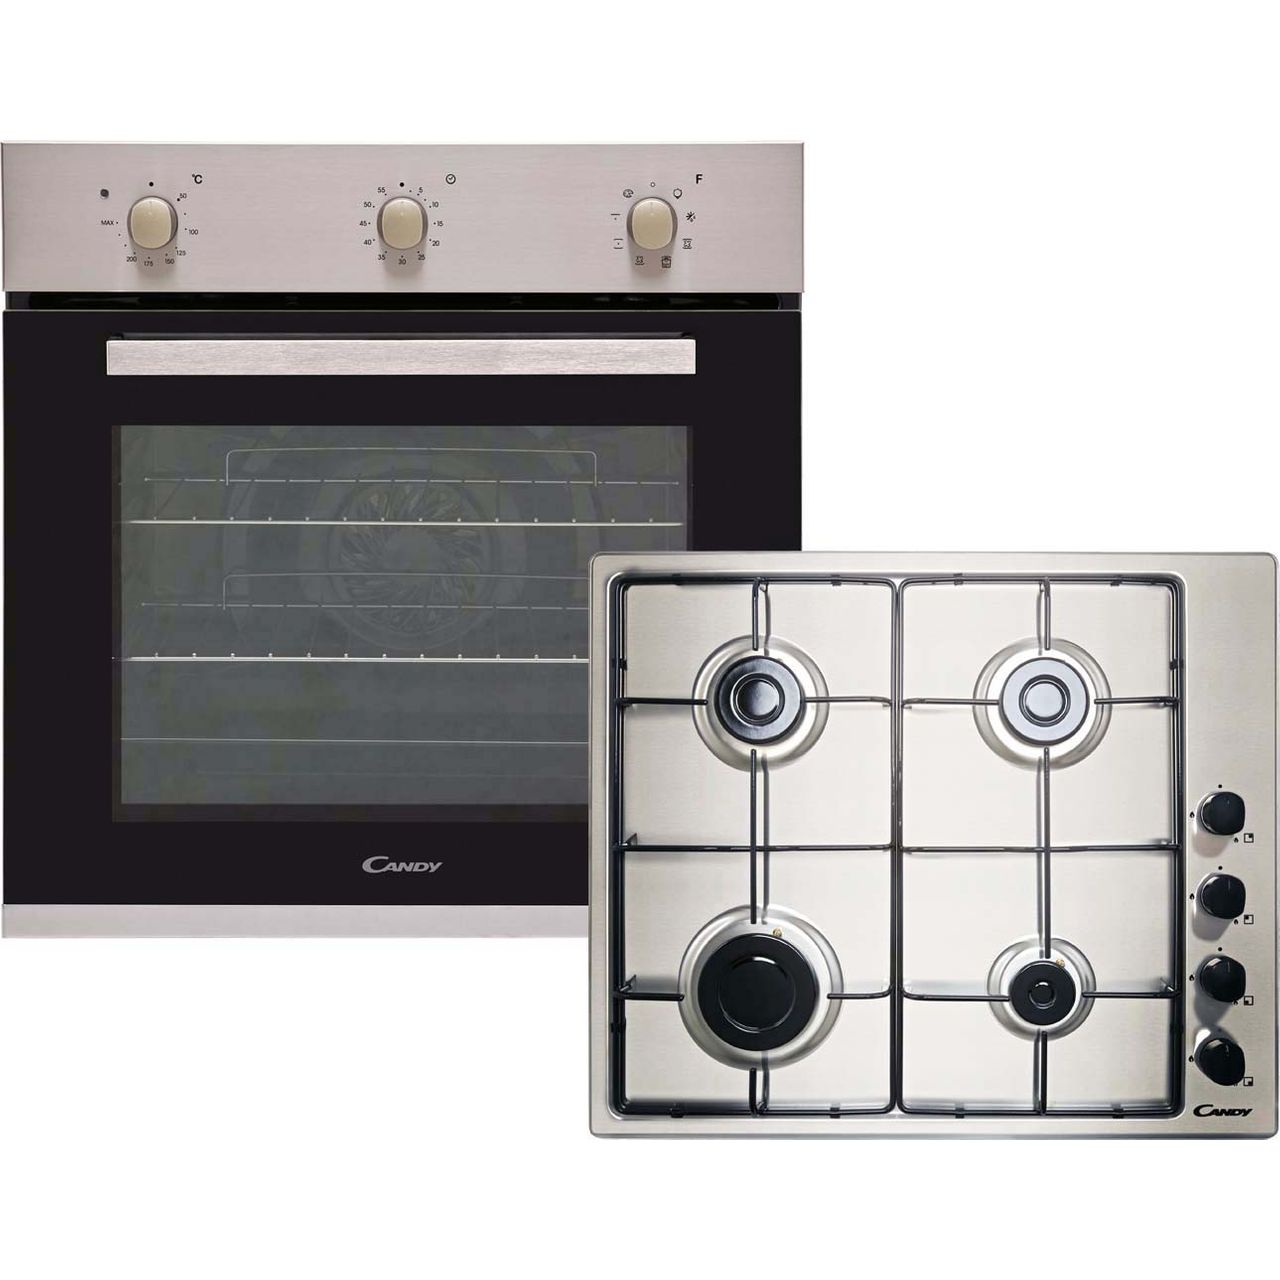 Candy CGHOPK60X/E Built In Electric Single Oven and Gas Hob Pack Review